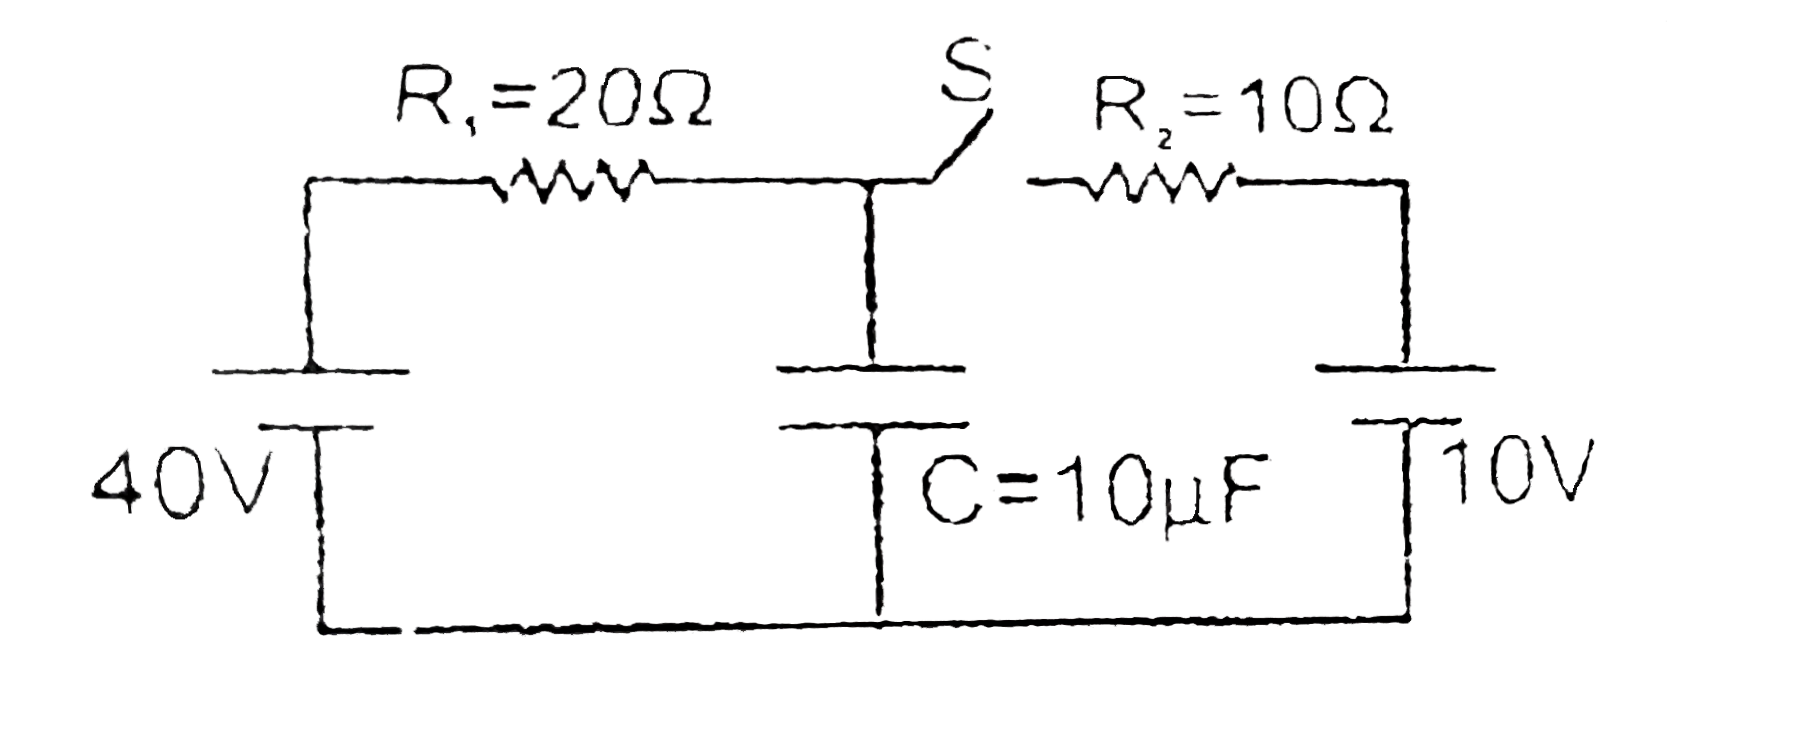 The circuit consists of two resistors (of resistance R(1) = 20 Omega and R(2) = 10 Omega), a capacitor (of capacitance C =10 muF) and two ideal cells. In the circuit shown the capacitor is in steady state and the switch S is open      the circuit is in steady state with switch S closed. Now the switch S is opened. Just after the switch S is opened. the current through resistance R(1) is